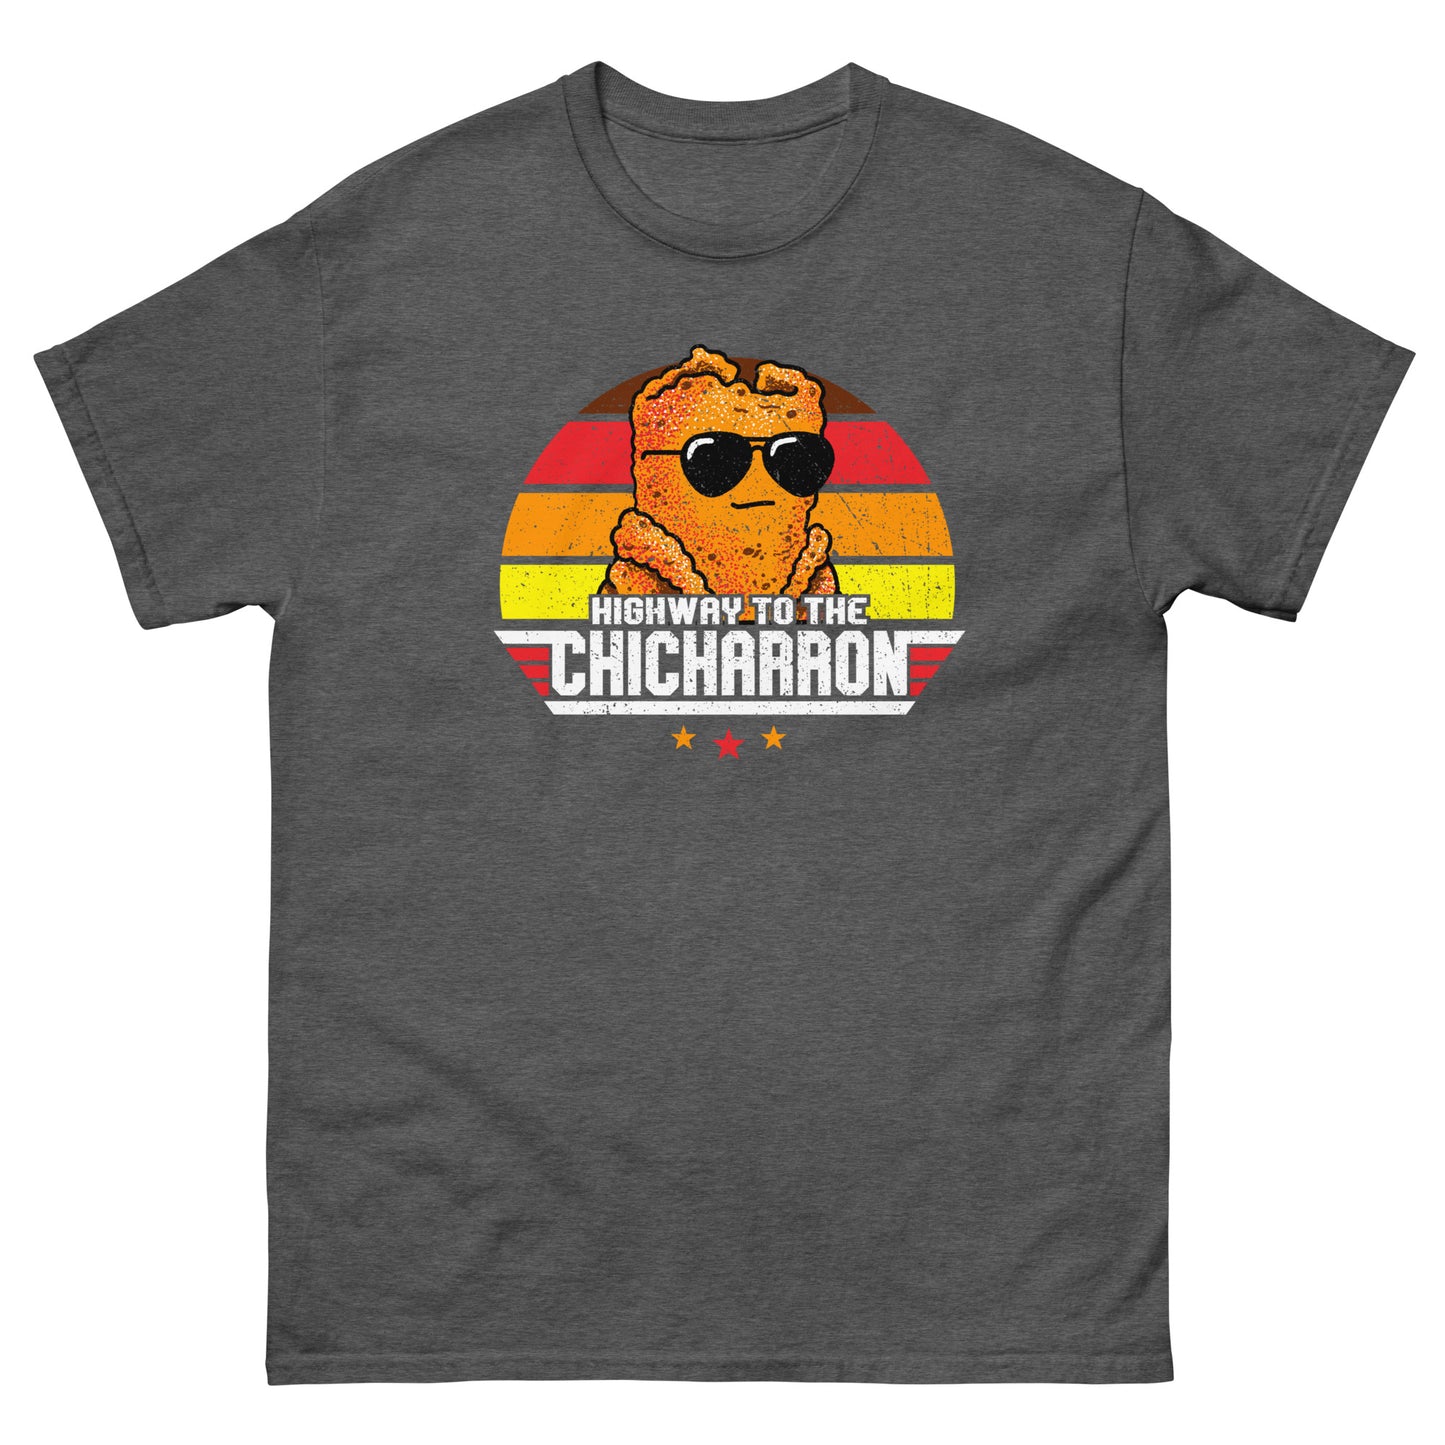 Highway to the Chicharron Funny Mexican Food T-Shirt